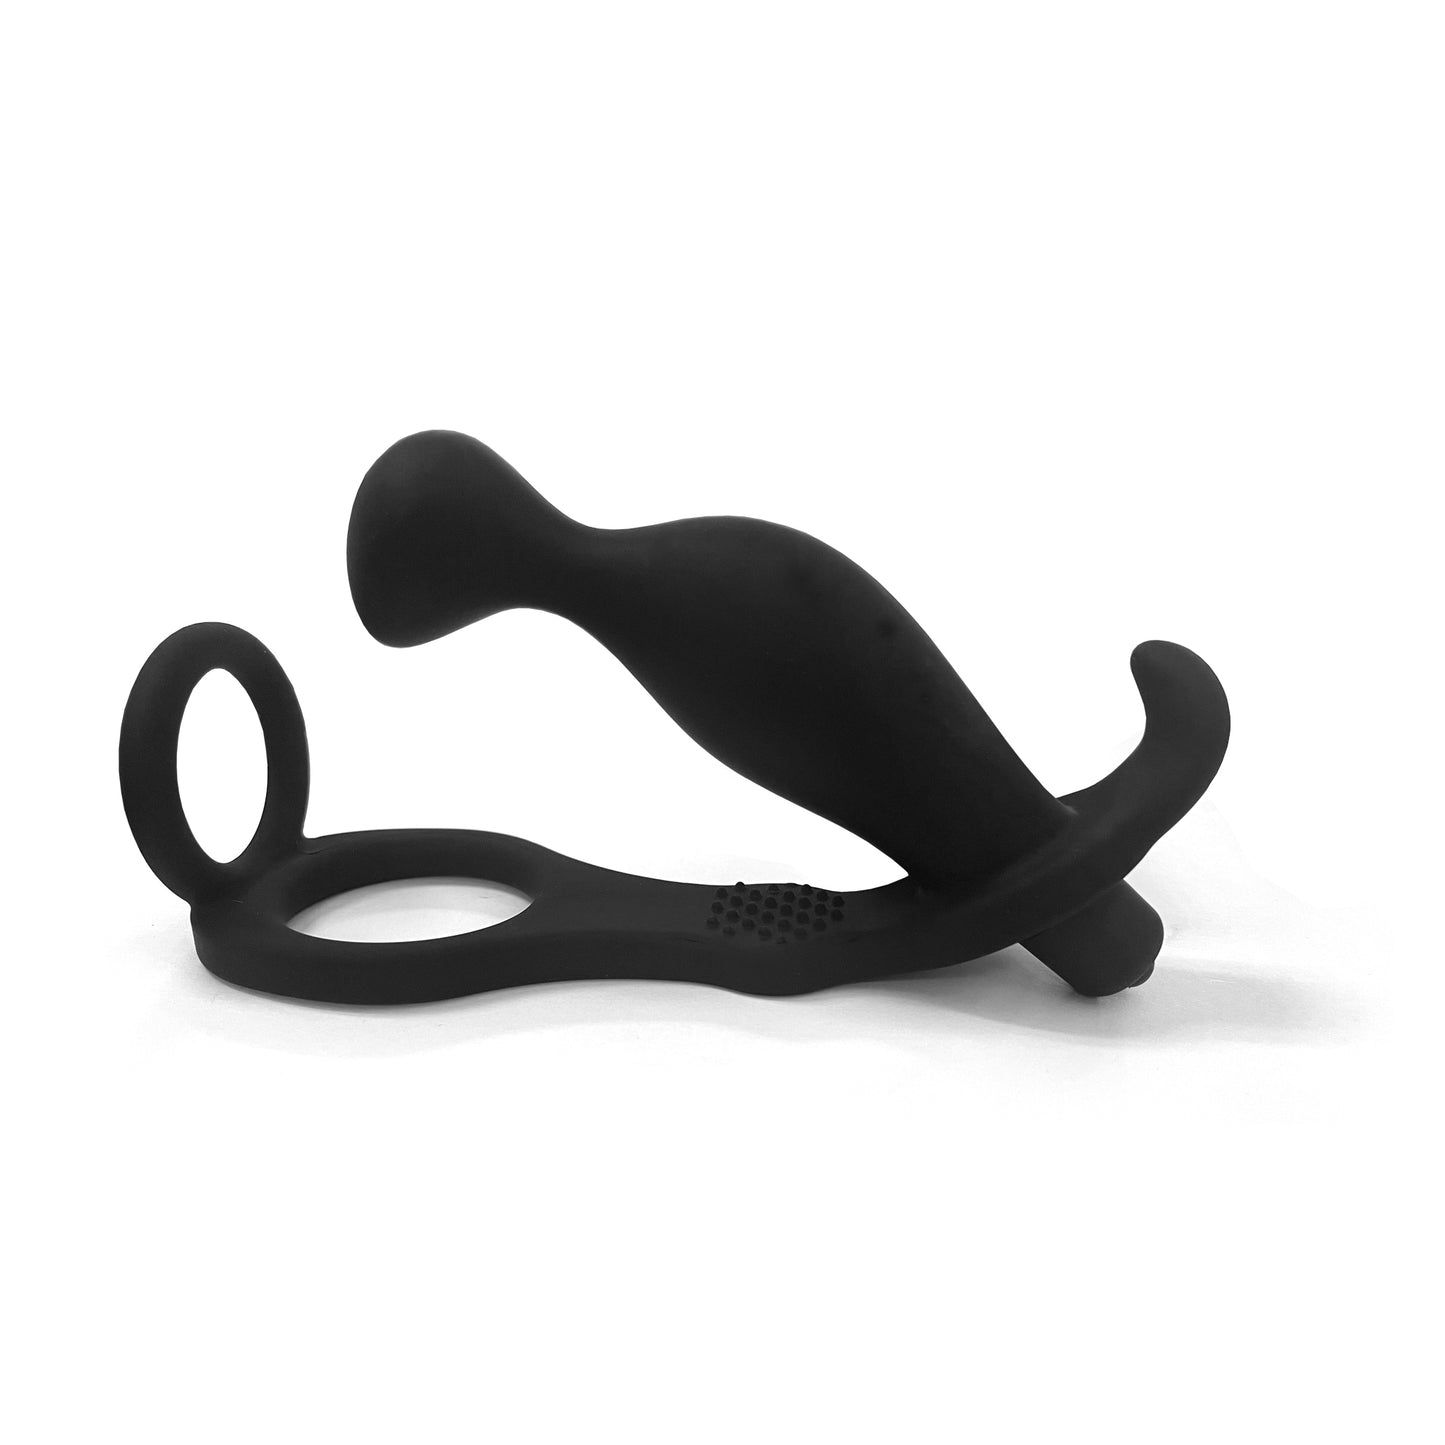 Cocked & Loaded Ballistic Double C-Ring with Prostate Massager